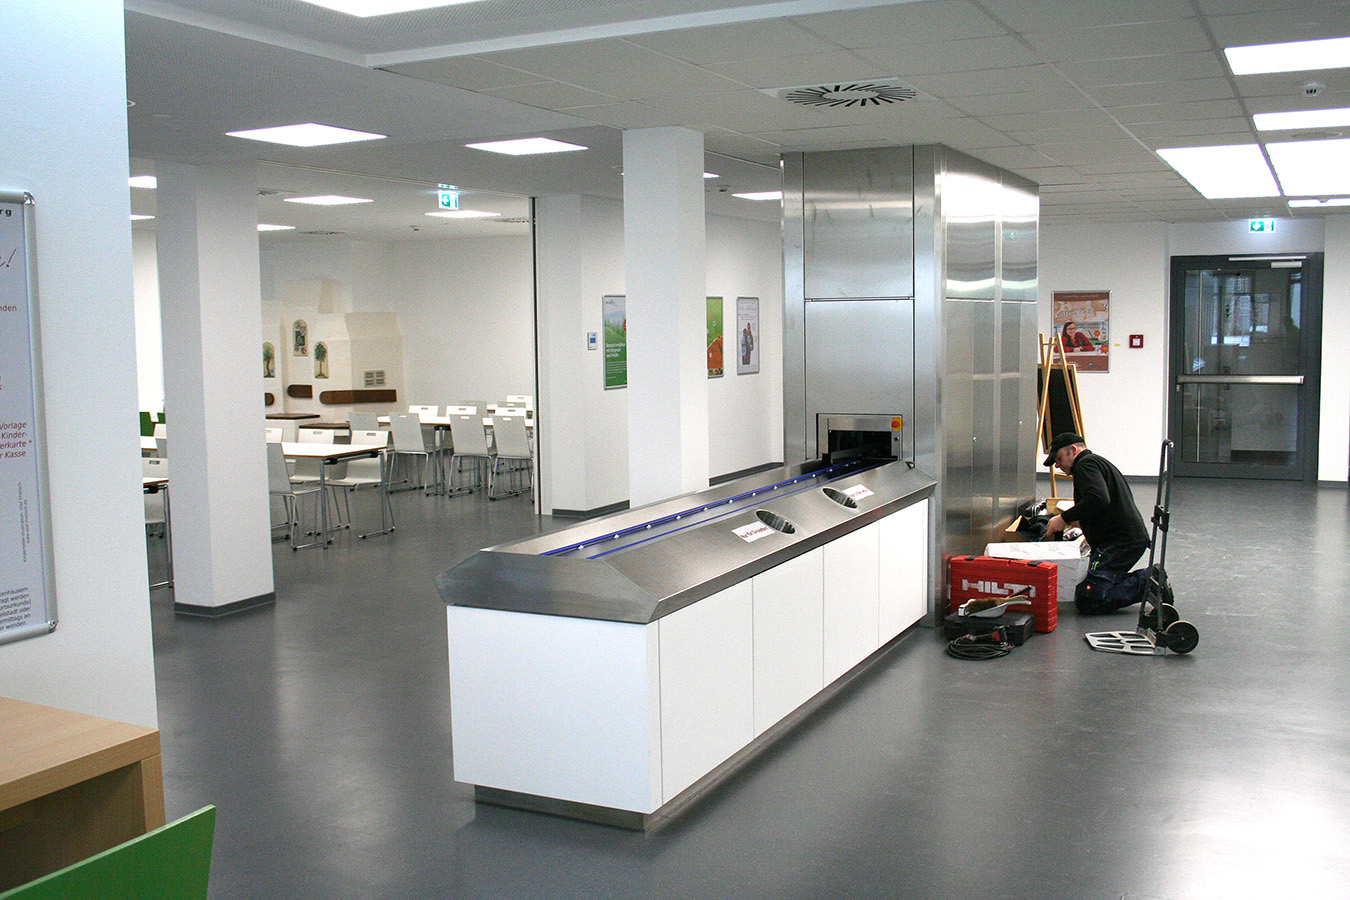 The serving area on the first floor has been completely renovated. (Image: FAU/Boris Mijat)